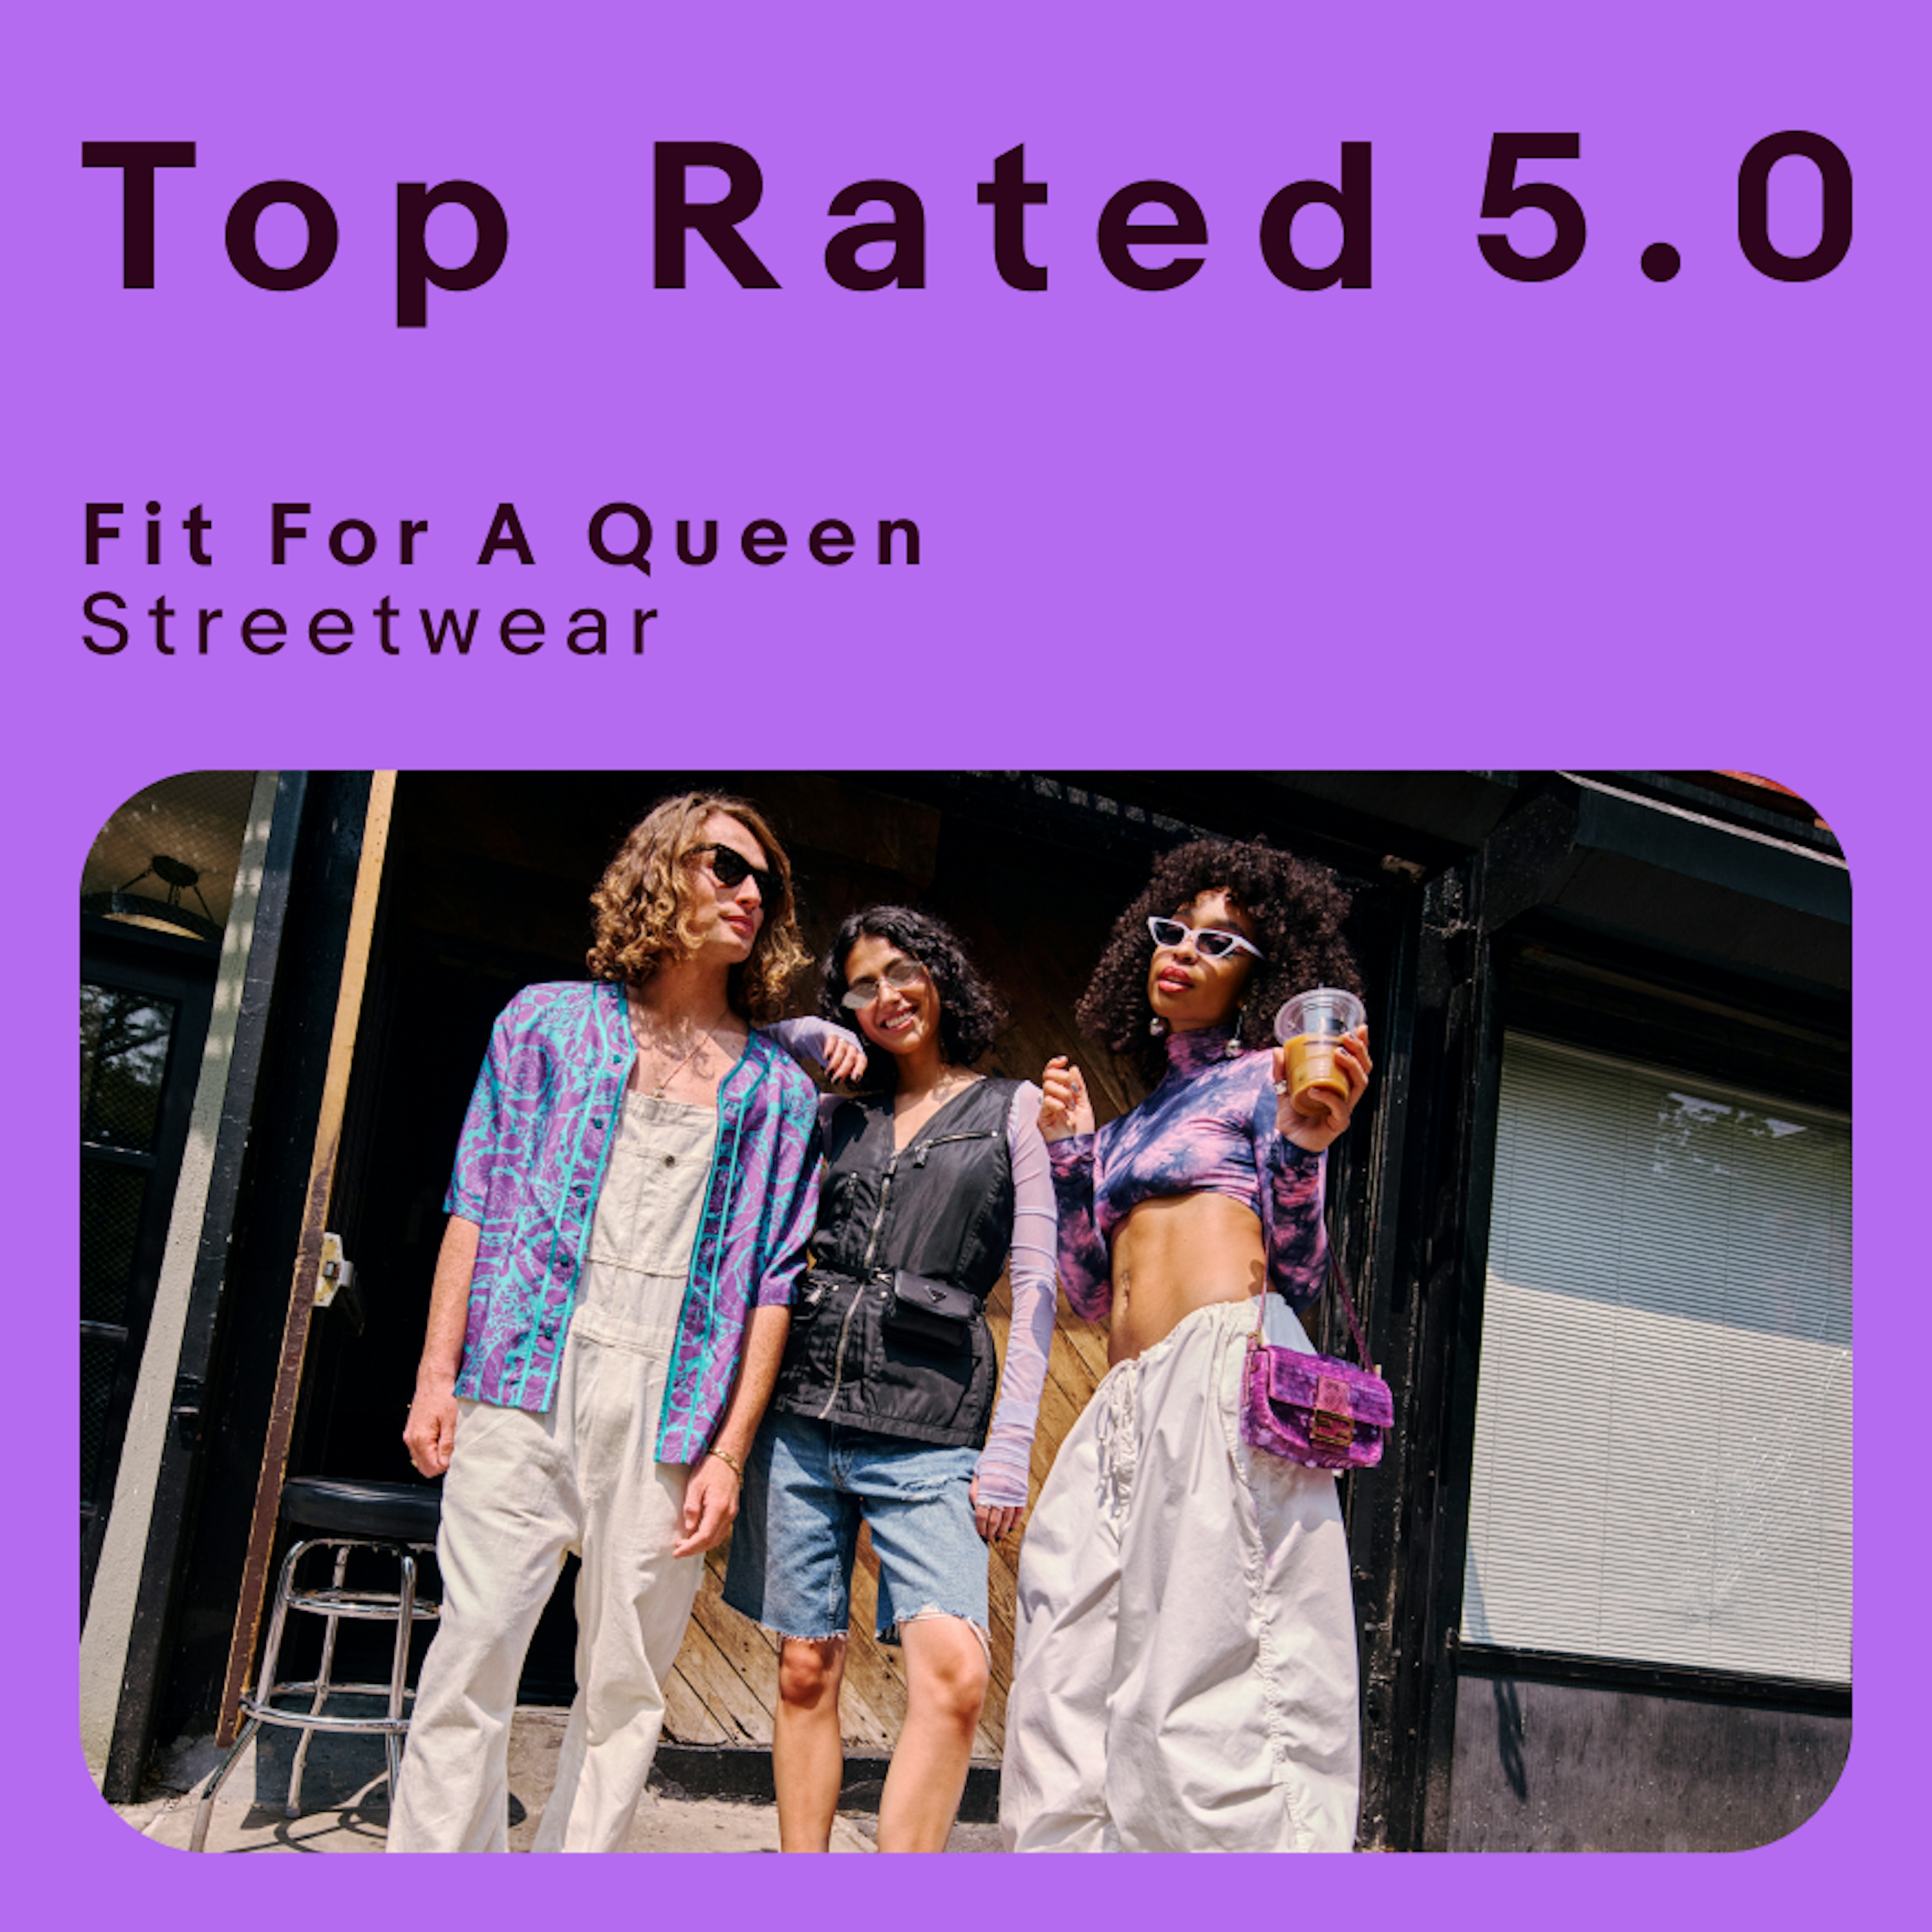 A vibrant purple ad with an image of 3 people wearing fashionable clothes. The type at the top is using very wide, tracked type which causes a lot of gaps in the letters.